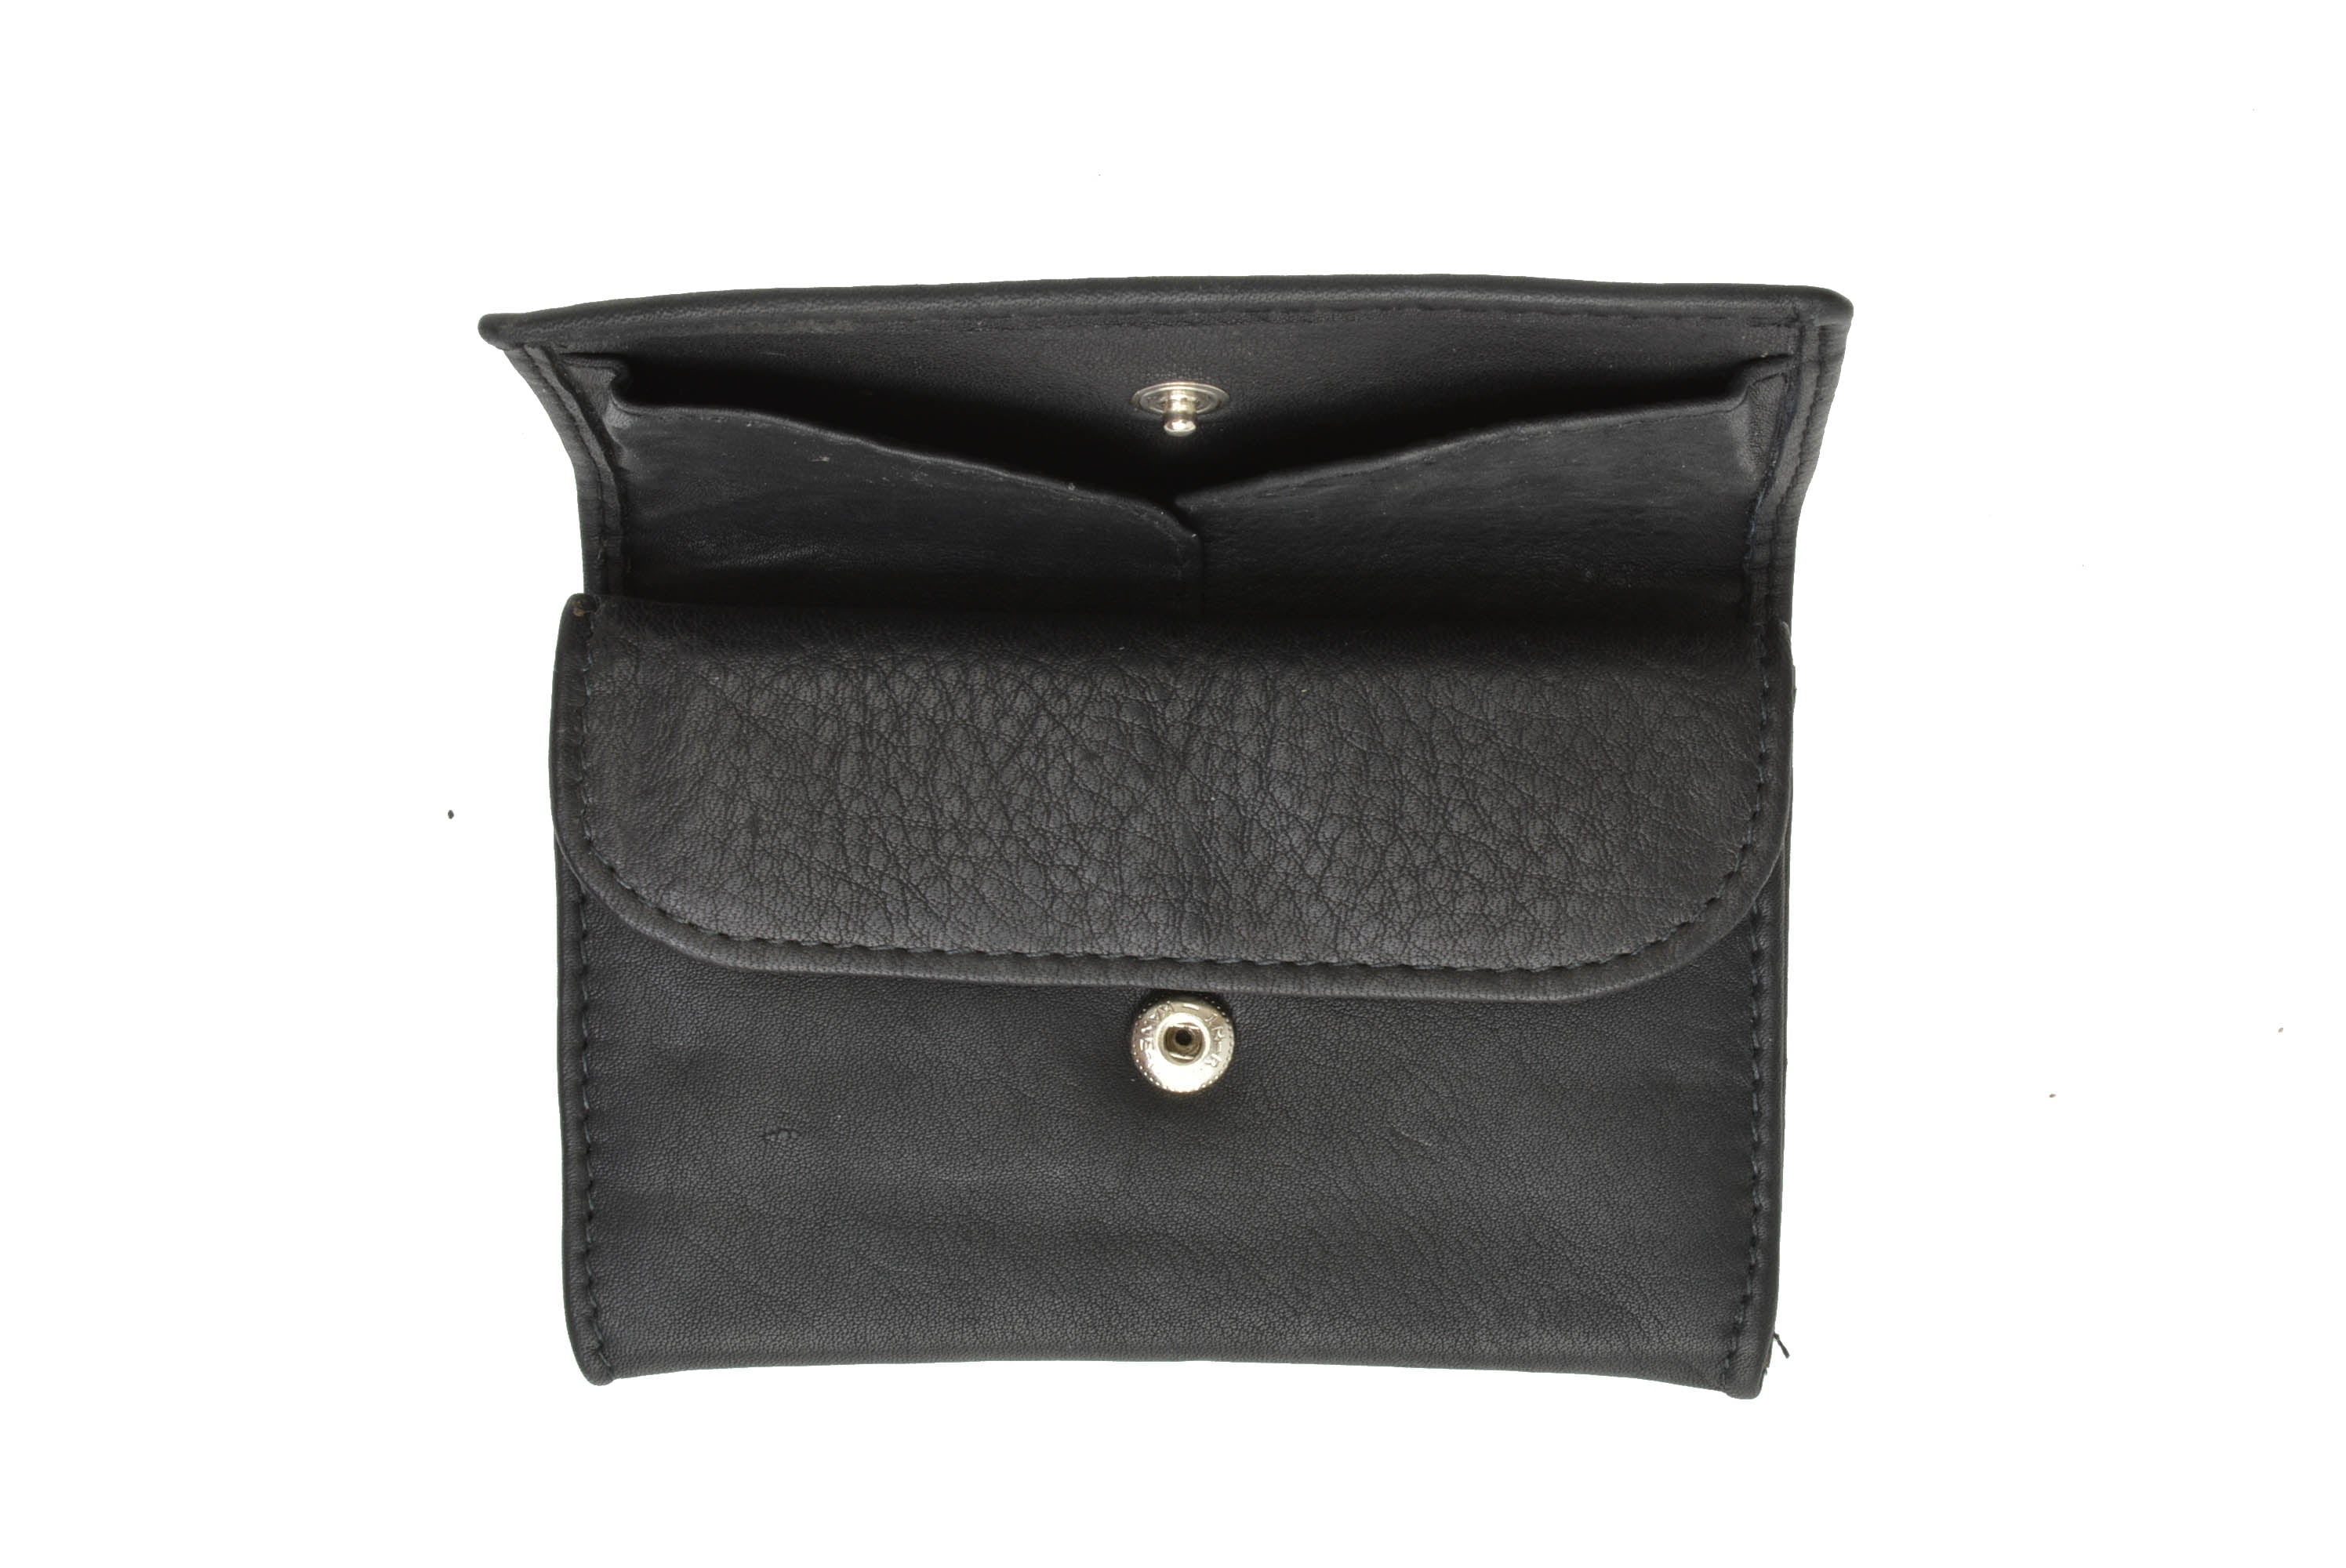 Large Leather Coin Purse Clutch, Black - Measures 5 3/4 Wide x 4 1/4 High  x 1 1/2 Deep 